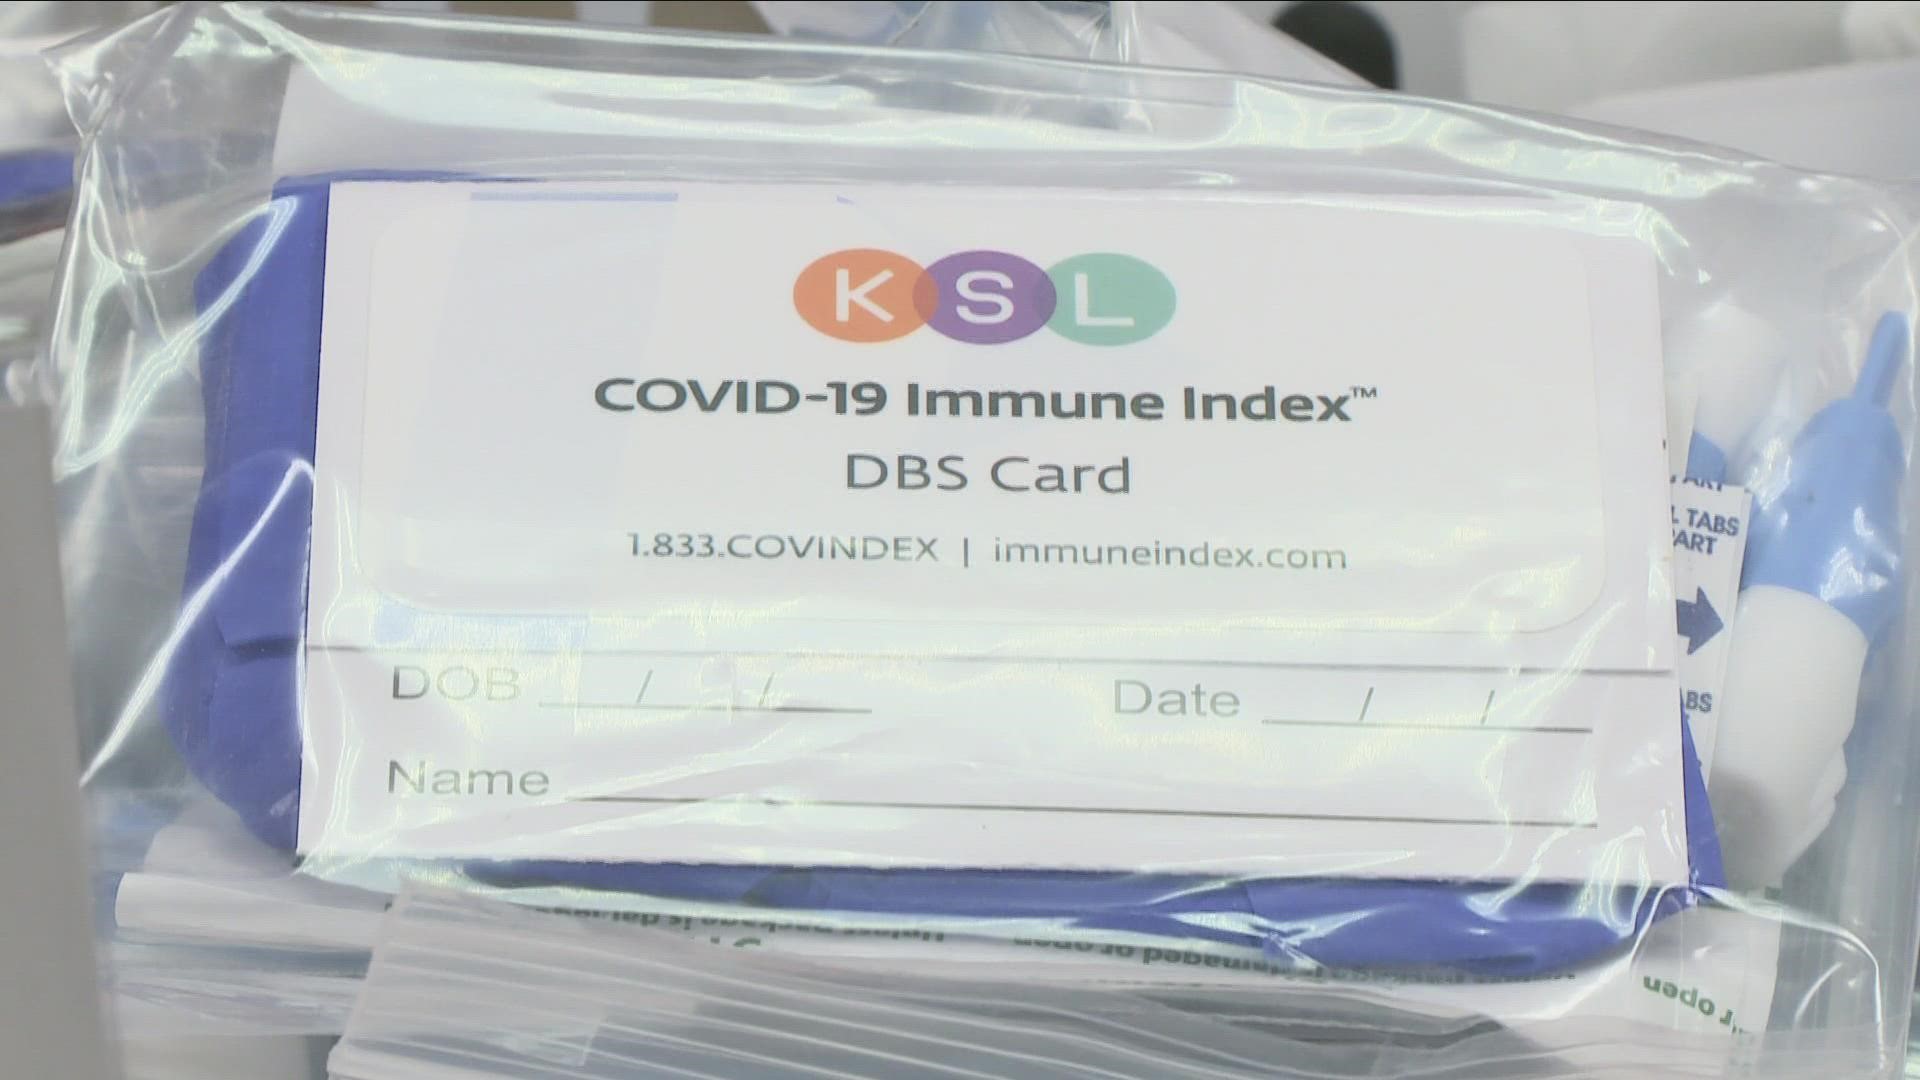 There's a test that will tell you how strong your antibodies are against COVID-19.